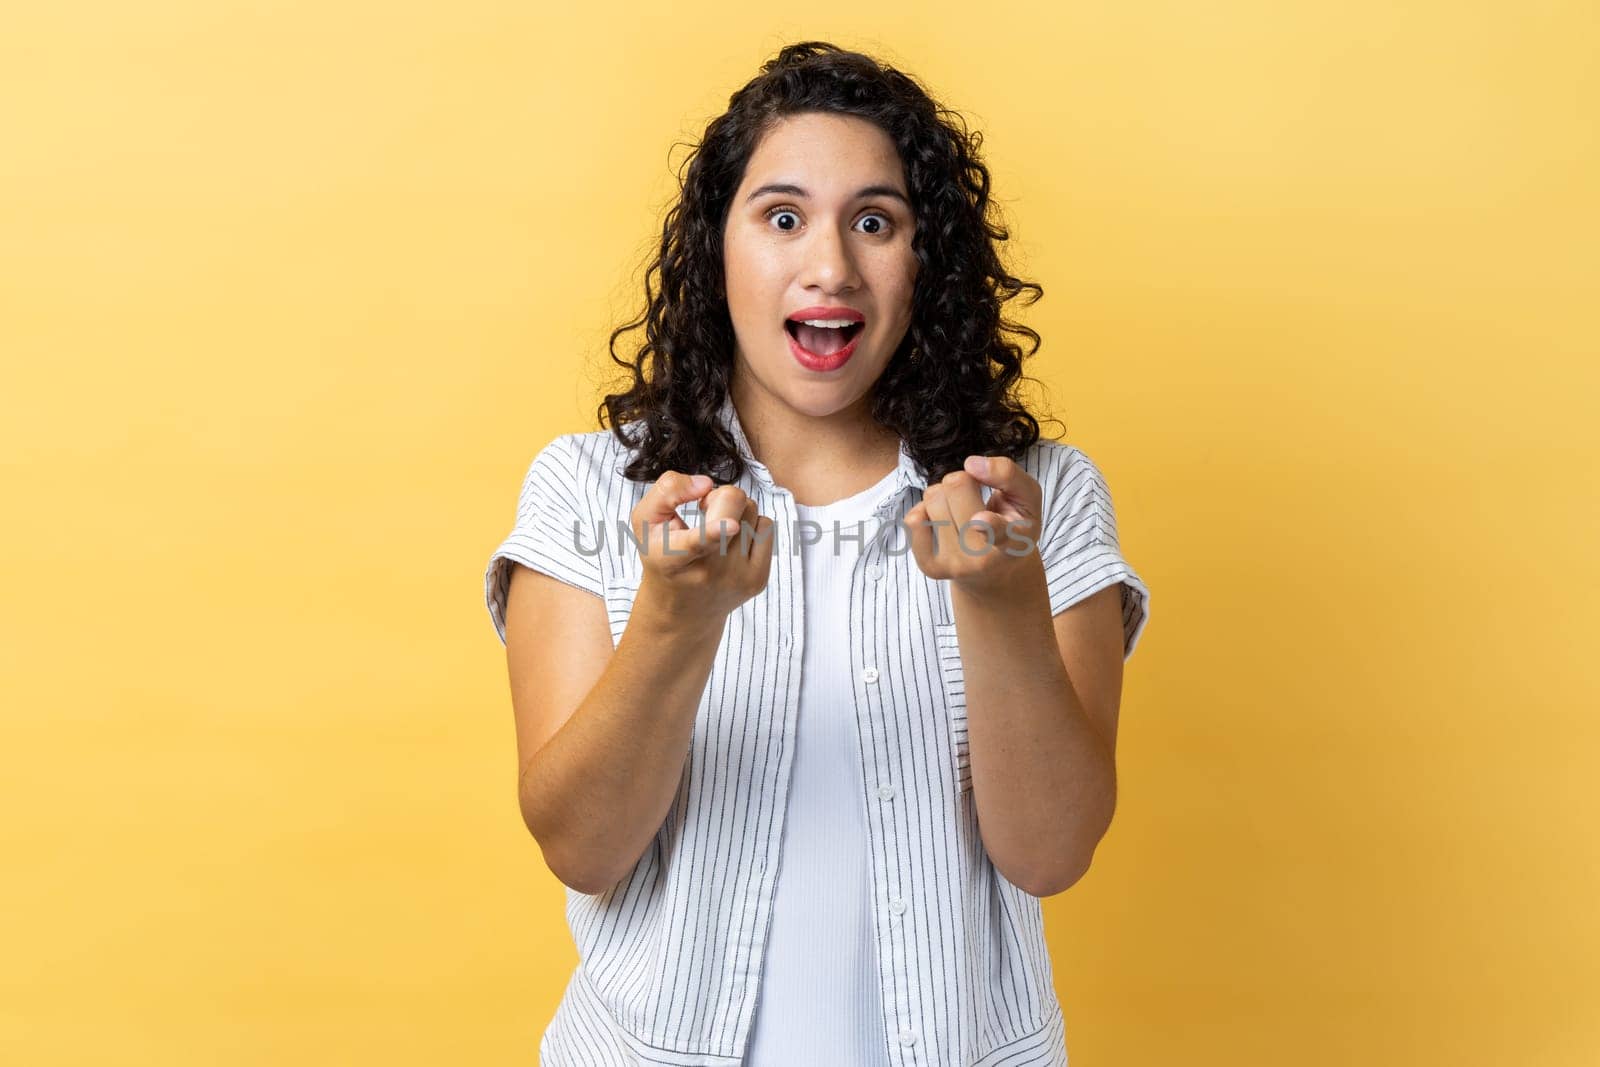 Portrait of amazed excited beautiful woman with dark wavy hair pointing directly at you, choosing something, has shocked expression. Indoor studio shot isolated on yellow background.